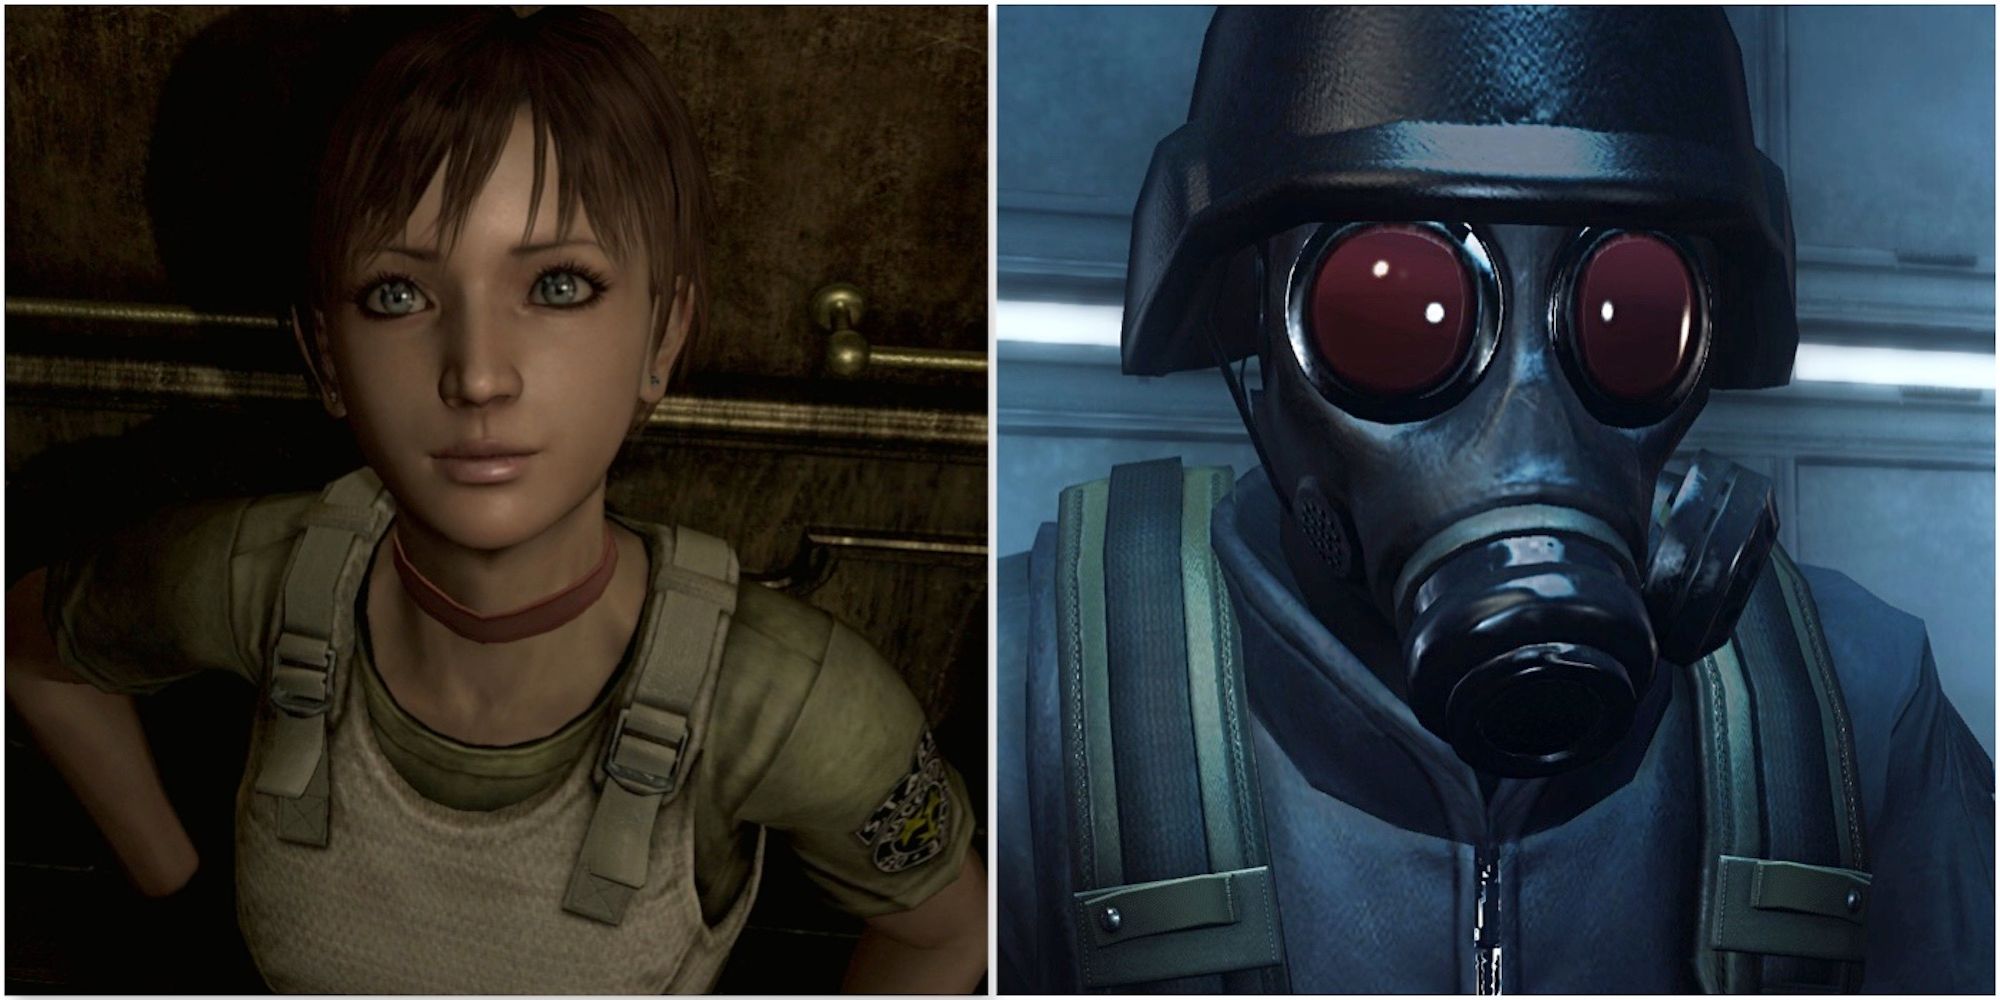 Rebecca in Resident Evil Zero and Hunk in Resident Evil Operation Raccoon City